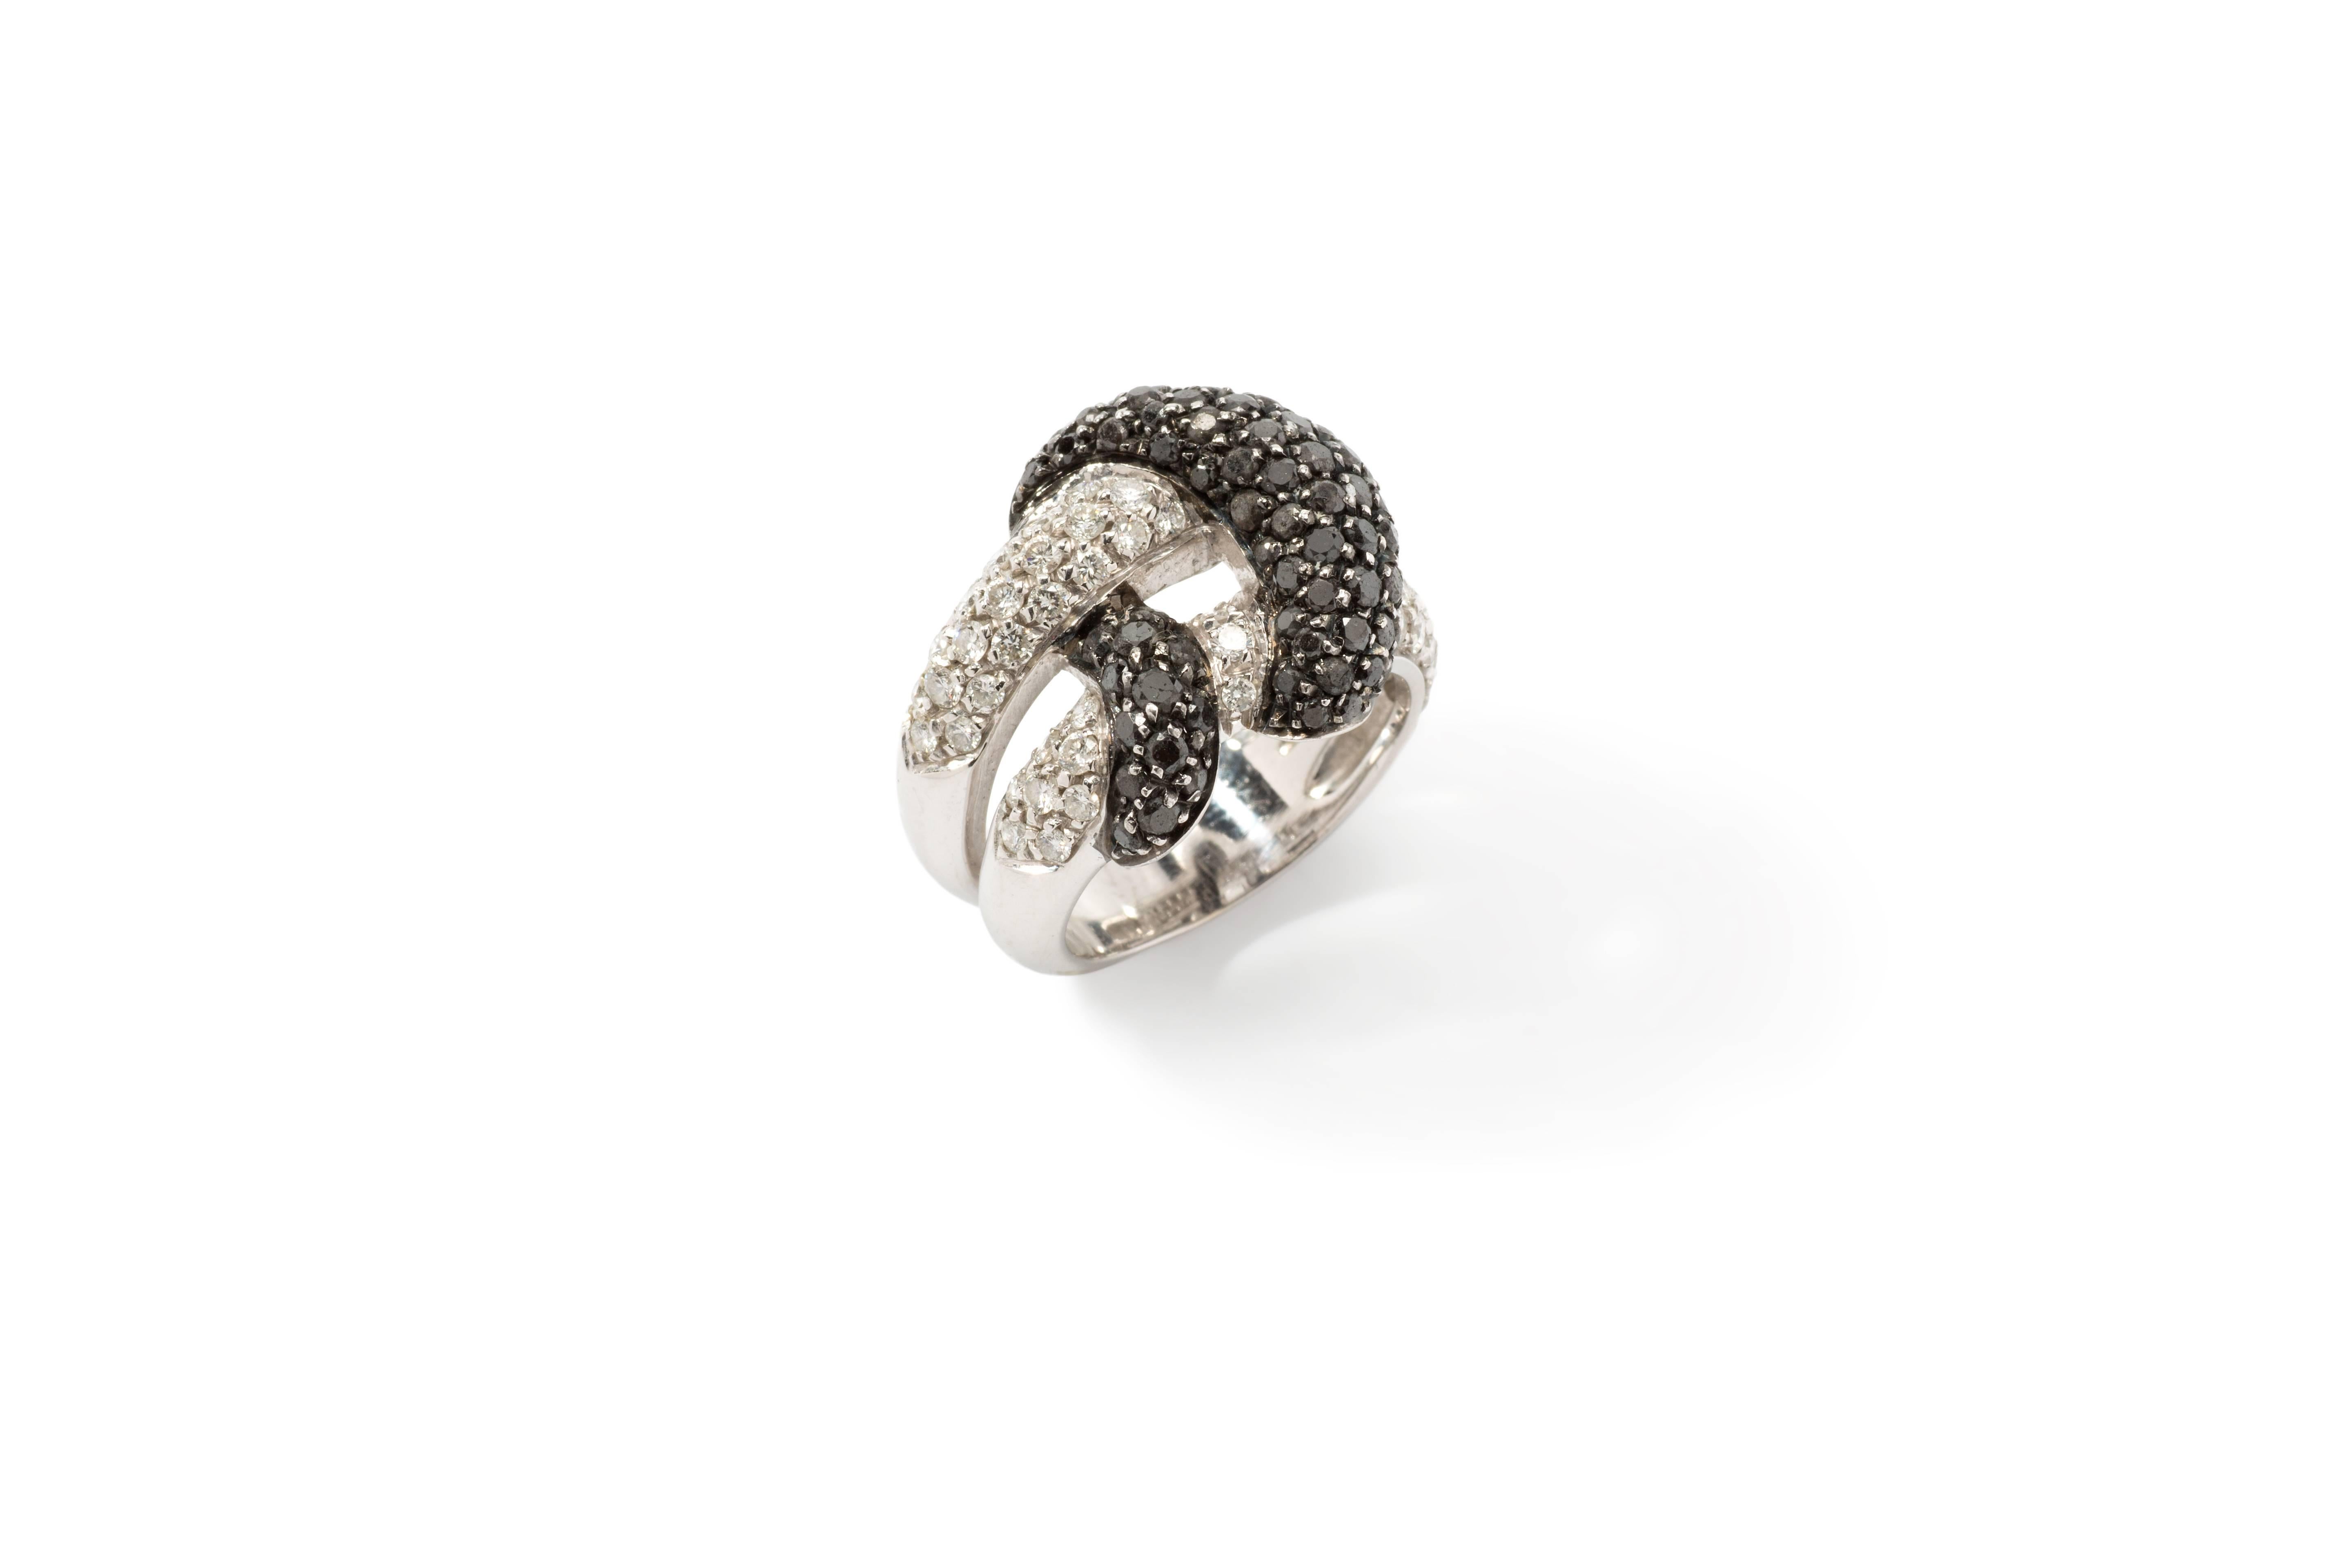 Pavé-set with circa 70 black brilliant-cut diamonds and 59 brilliant-cut diamonds weighing approximately 3,30 ct. Mounted in 18K white gold. Total weight: 12,04 grams. Width: 0.71 ( 1,8 cm ). Ring size 53 ( US 5,5 ). Resizable